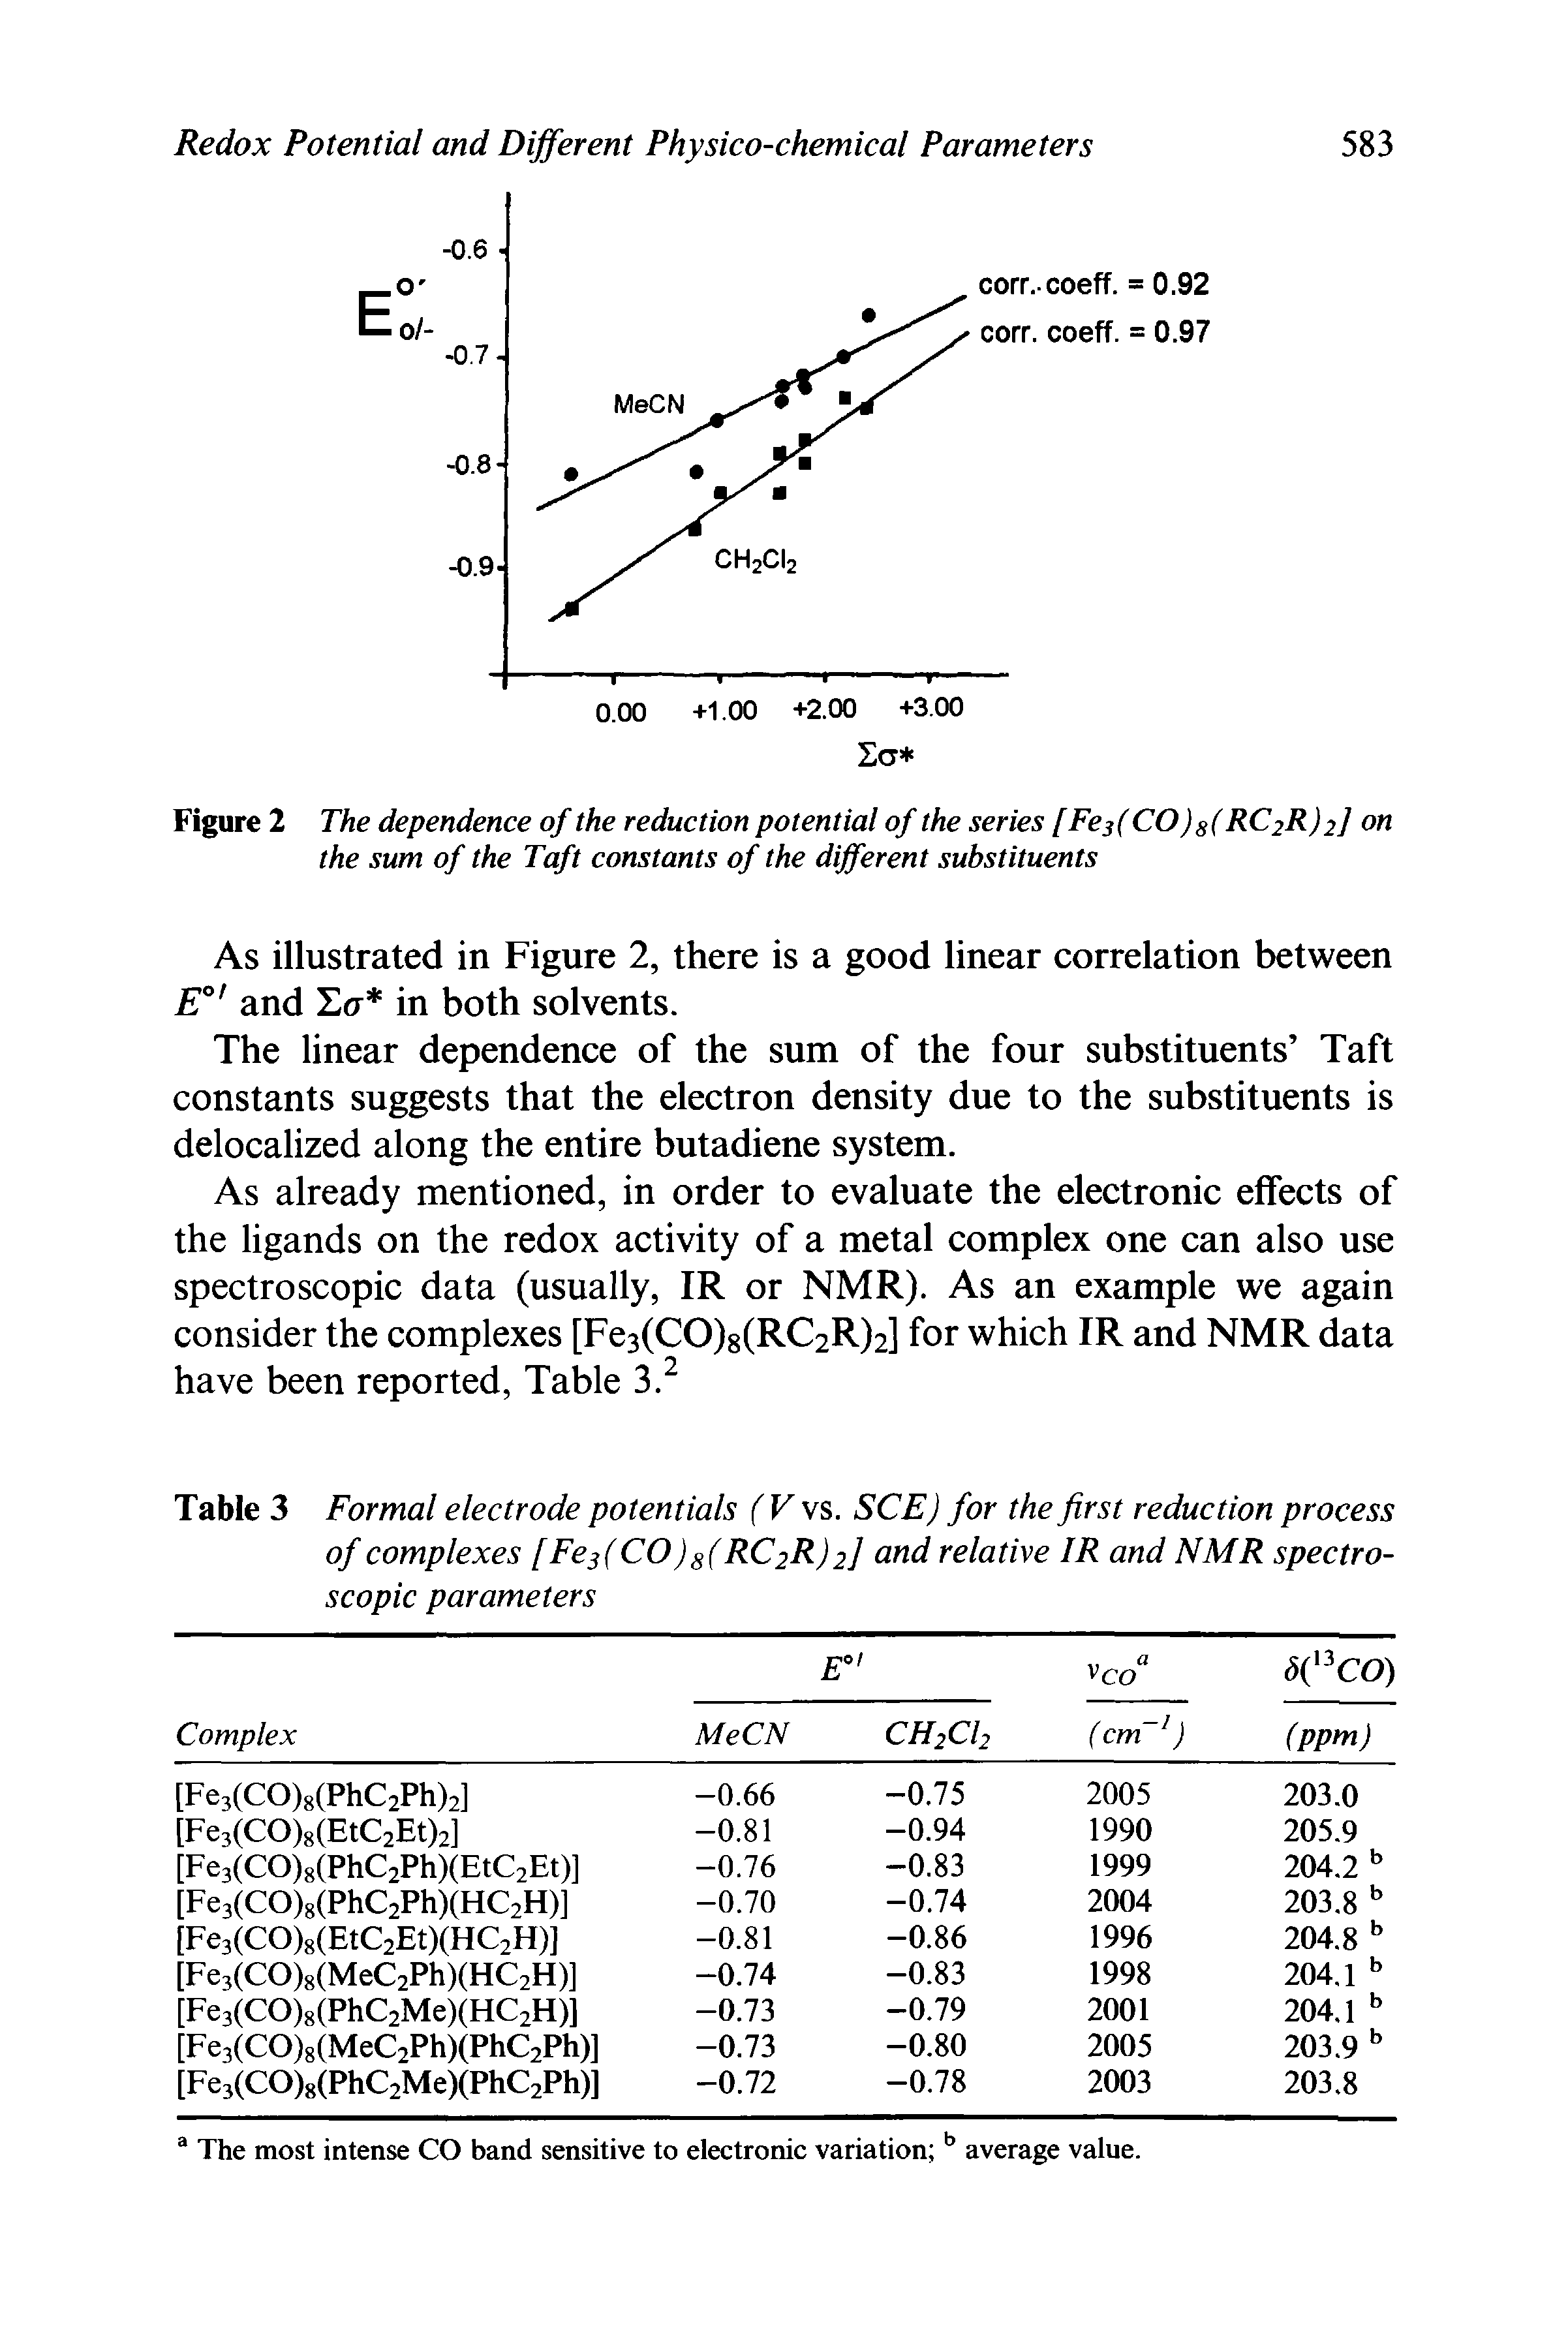 Figure 2 The dependence of the reduction potential of the series [Fe3(CO)8(RC2R)2] on the sum of the Taft constants of the different substituents...